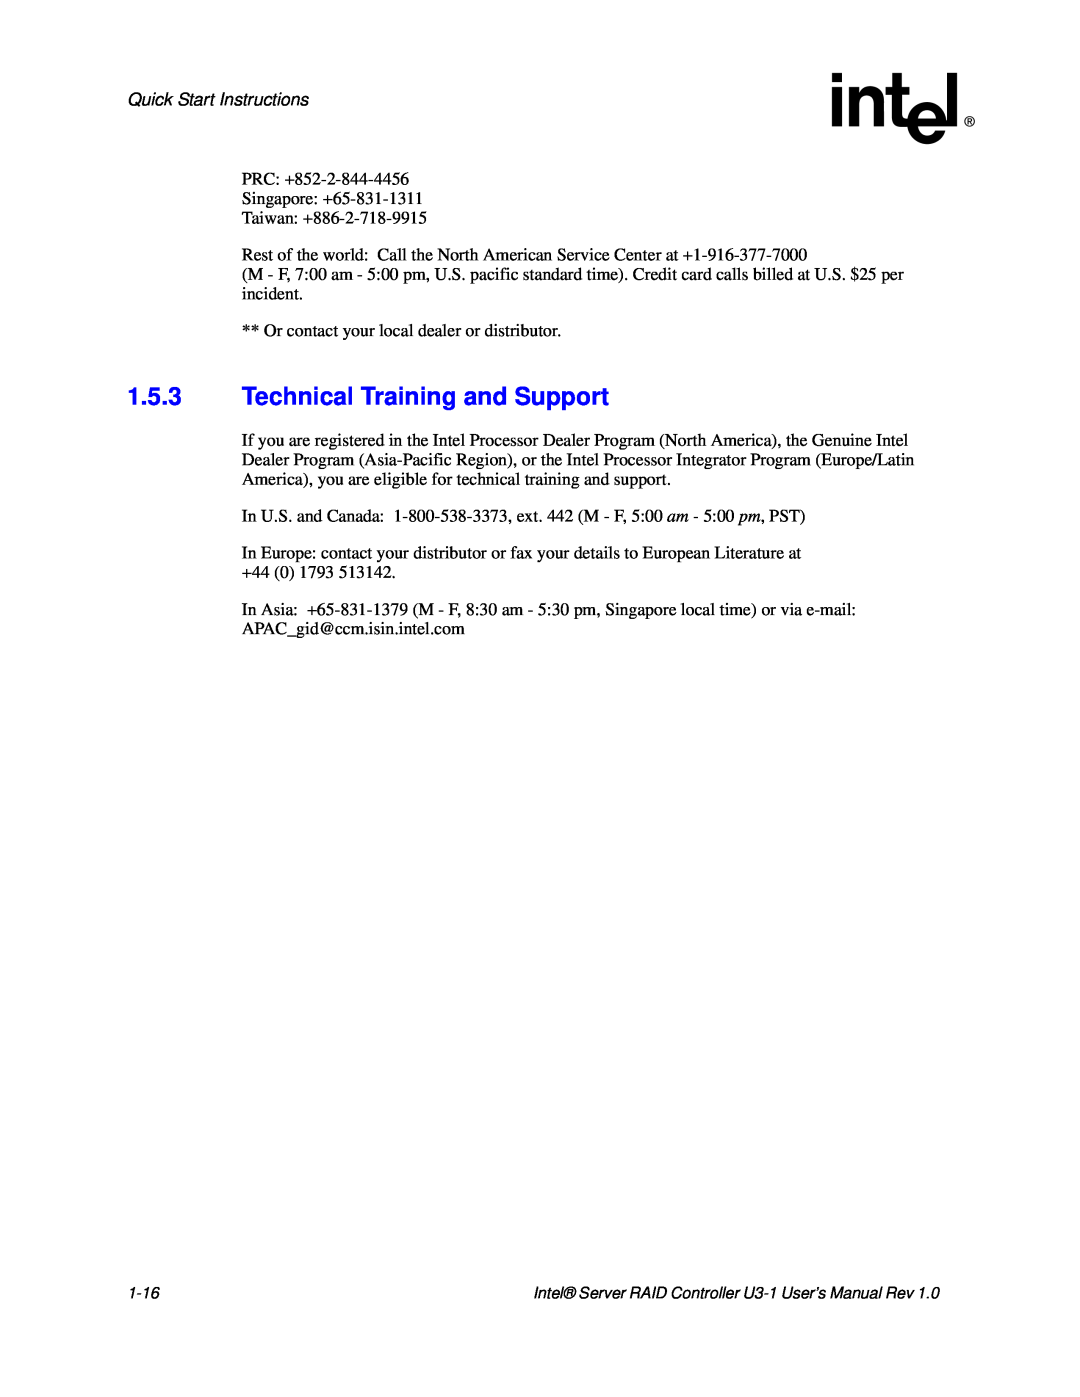 Intel SRCU31 user manual 1.5.3Technical Training and Support, Quick Start Instructions 